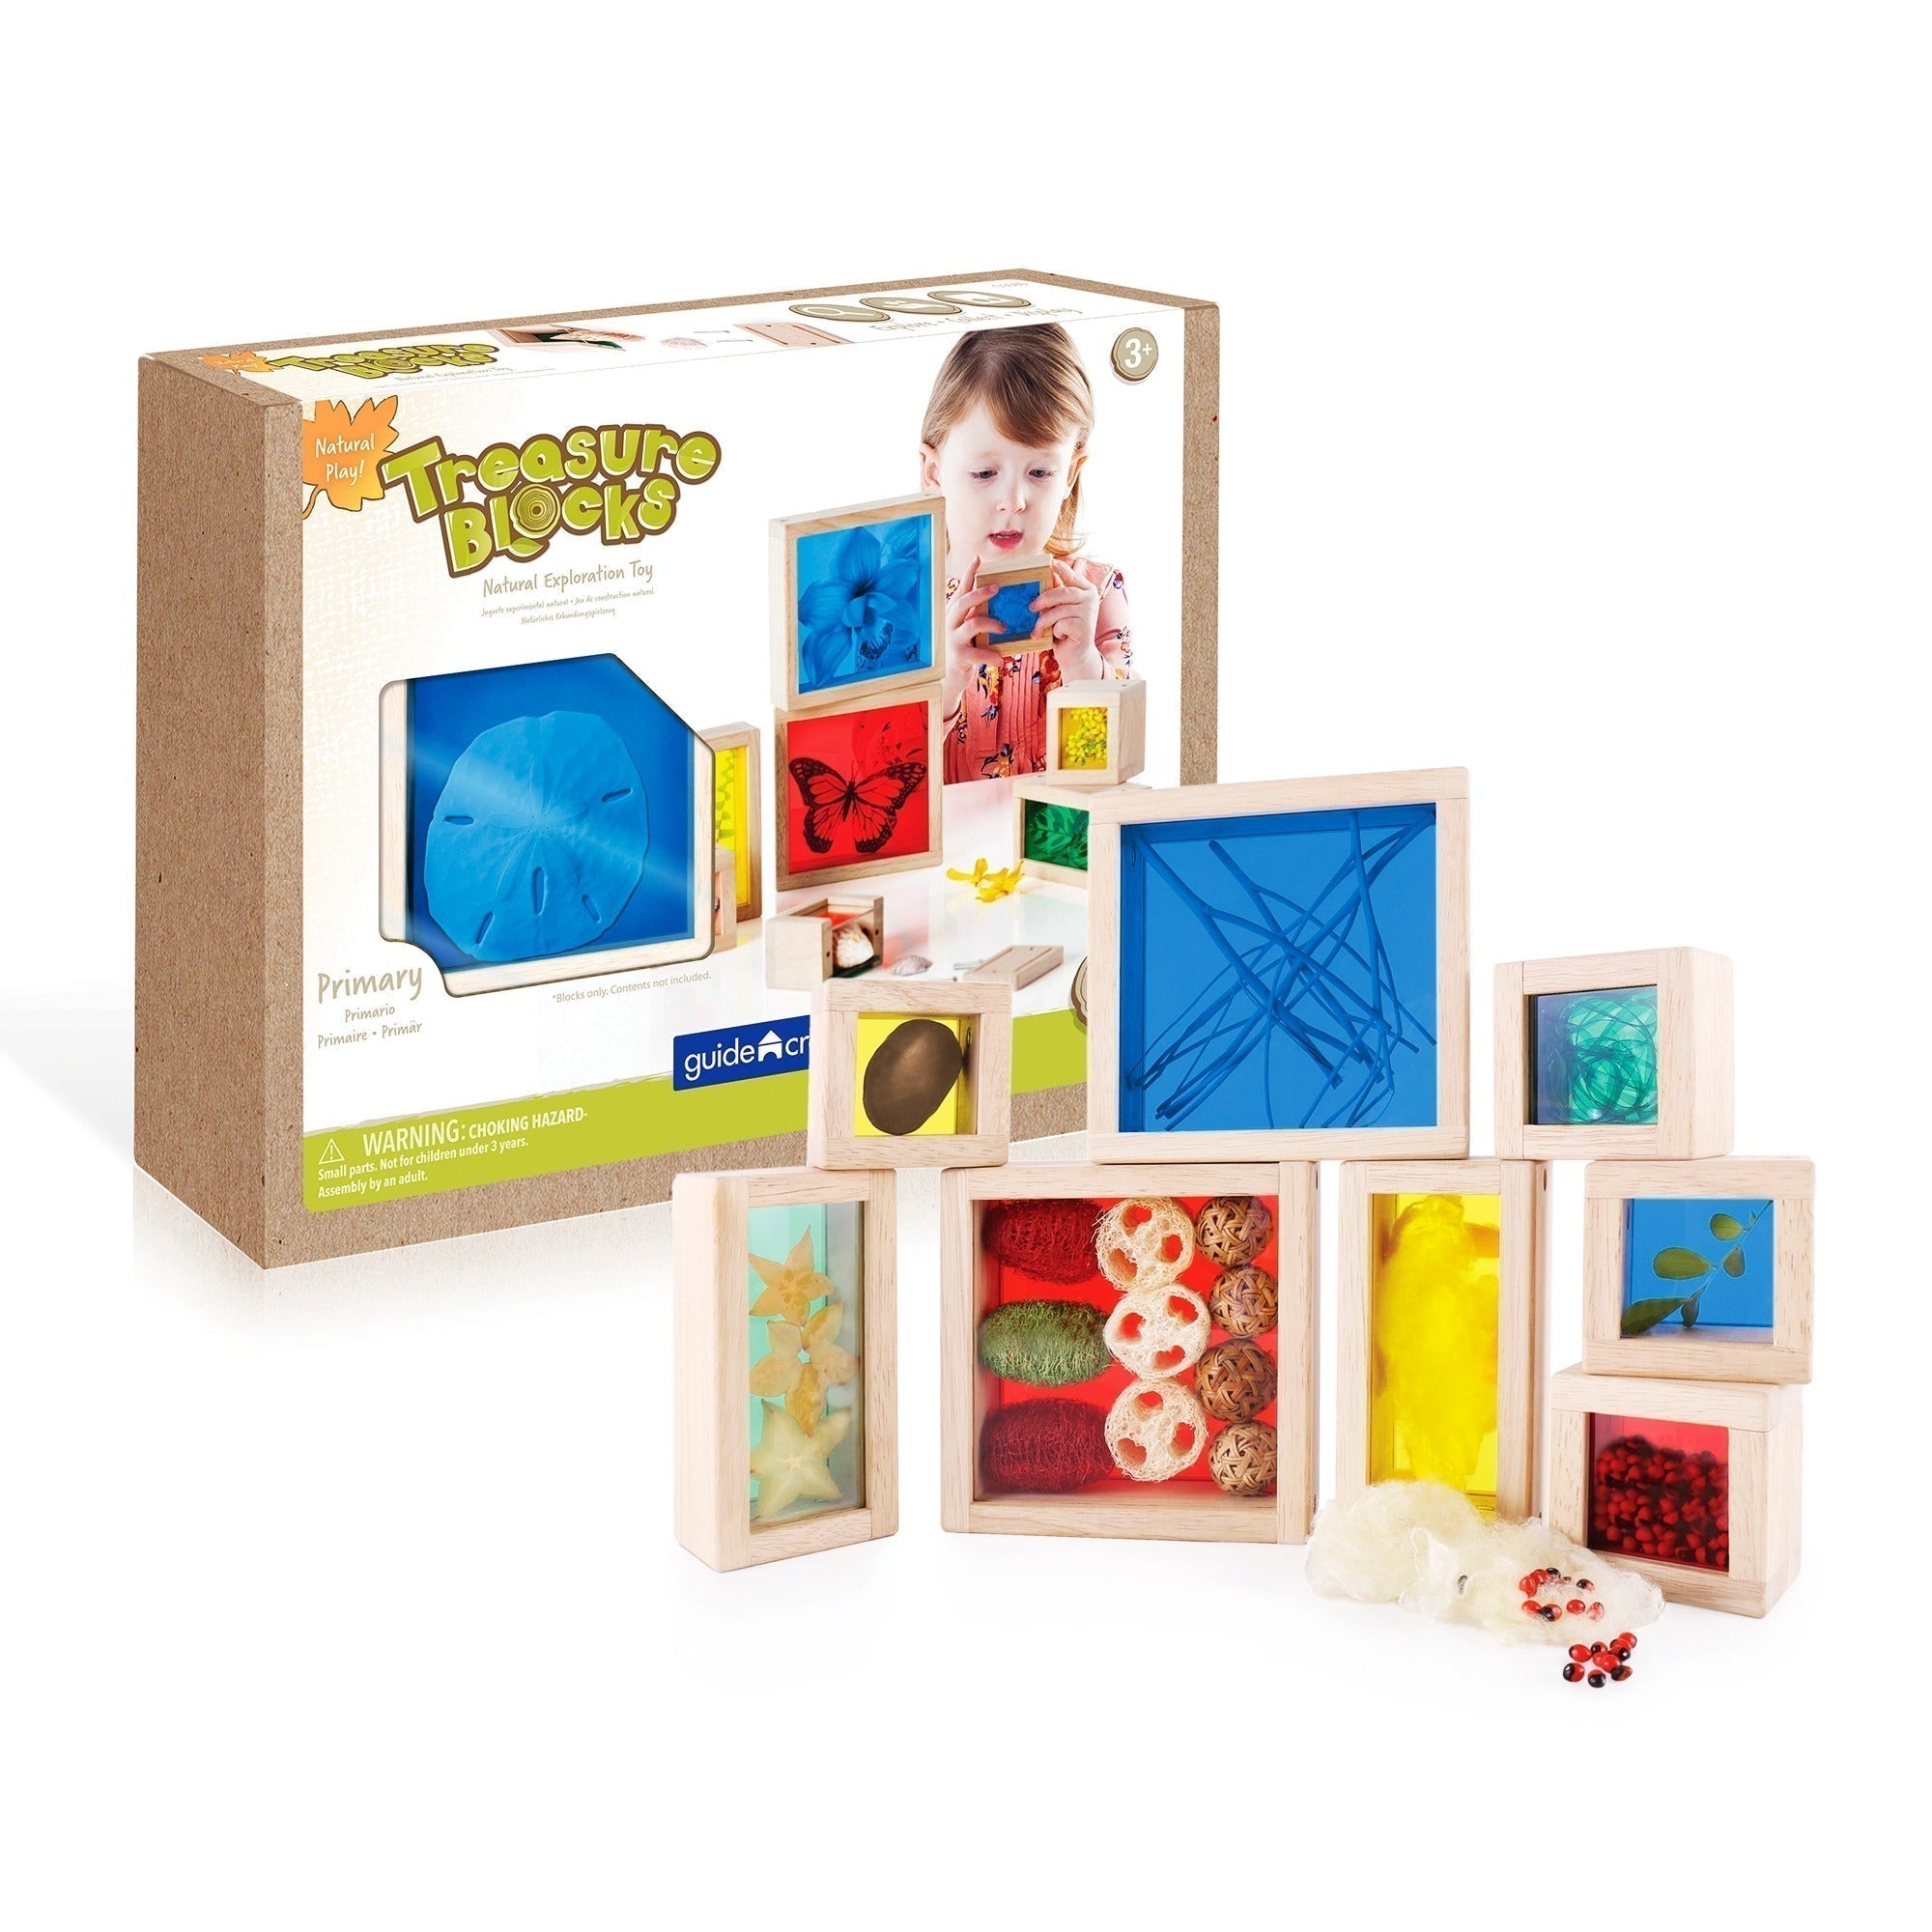 Guidecraft Treasure Blocks Primary, Curious collectors will love showing off their treasures in these colourful, acrylic displays with smooth, hardwood frames. The Guidecraft Treasure Blocks Primary show off flat and dimensional finds like rocks, beads, flowers, shells and small toys. The Guidecraft Treasure Blocks Primary have transparent windows in primary colours allow kids to study their objects up close, in the light, and from front and back perspectives. Includes a set of 8 blocks Treasure Blocks- Pri